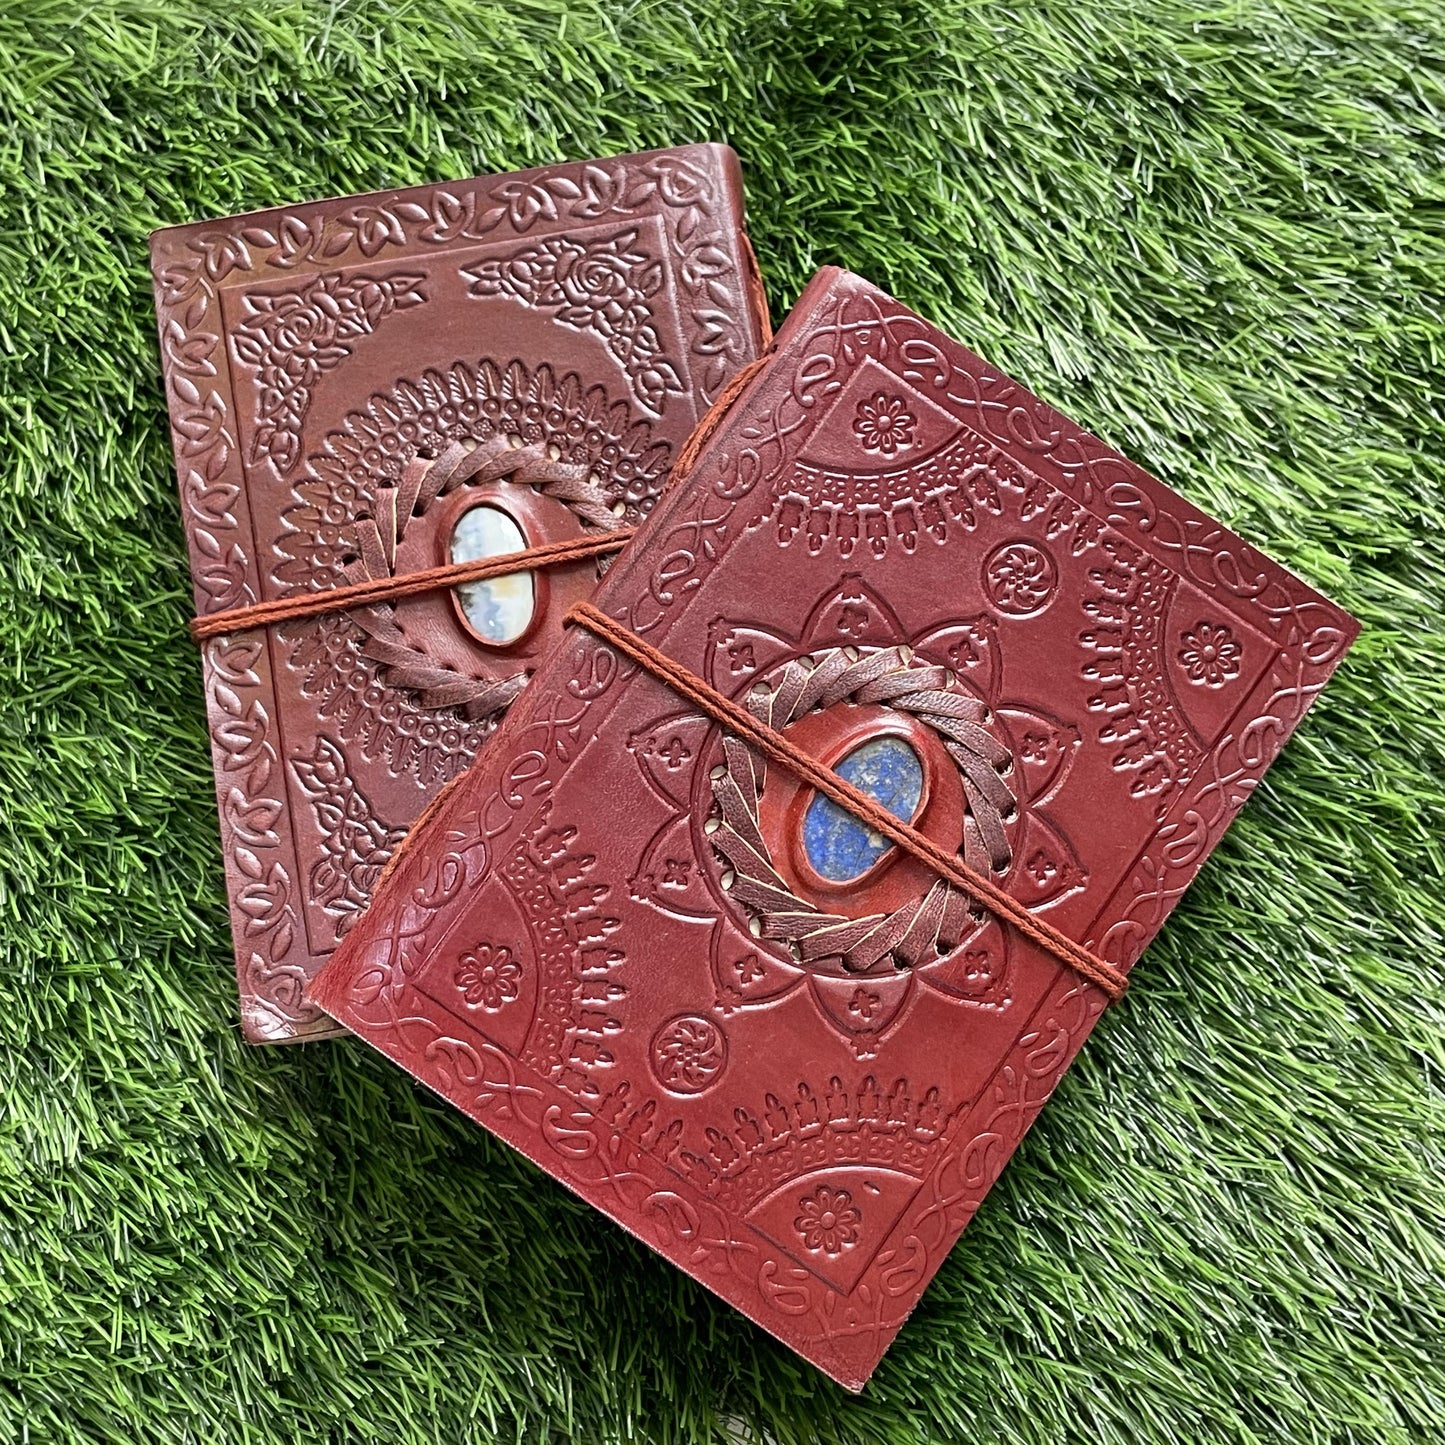 Embellished Leather Diary in a Compact 6x8 Inch Size" With Natural Gemstone